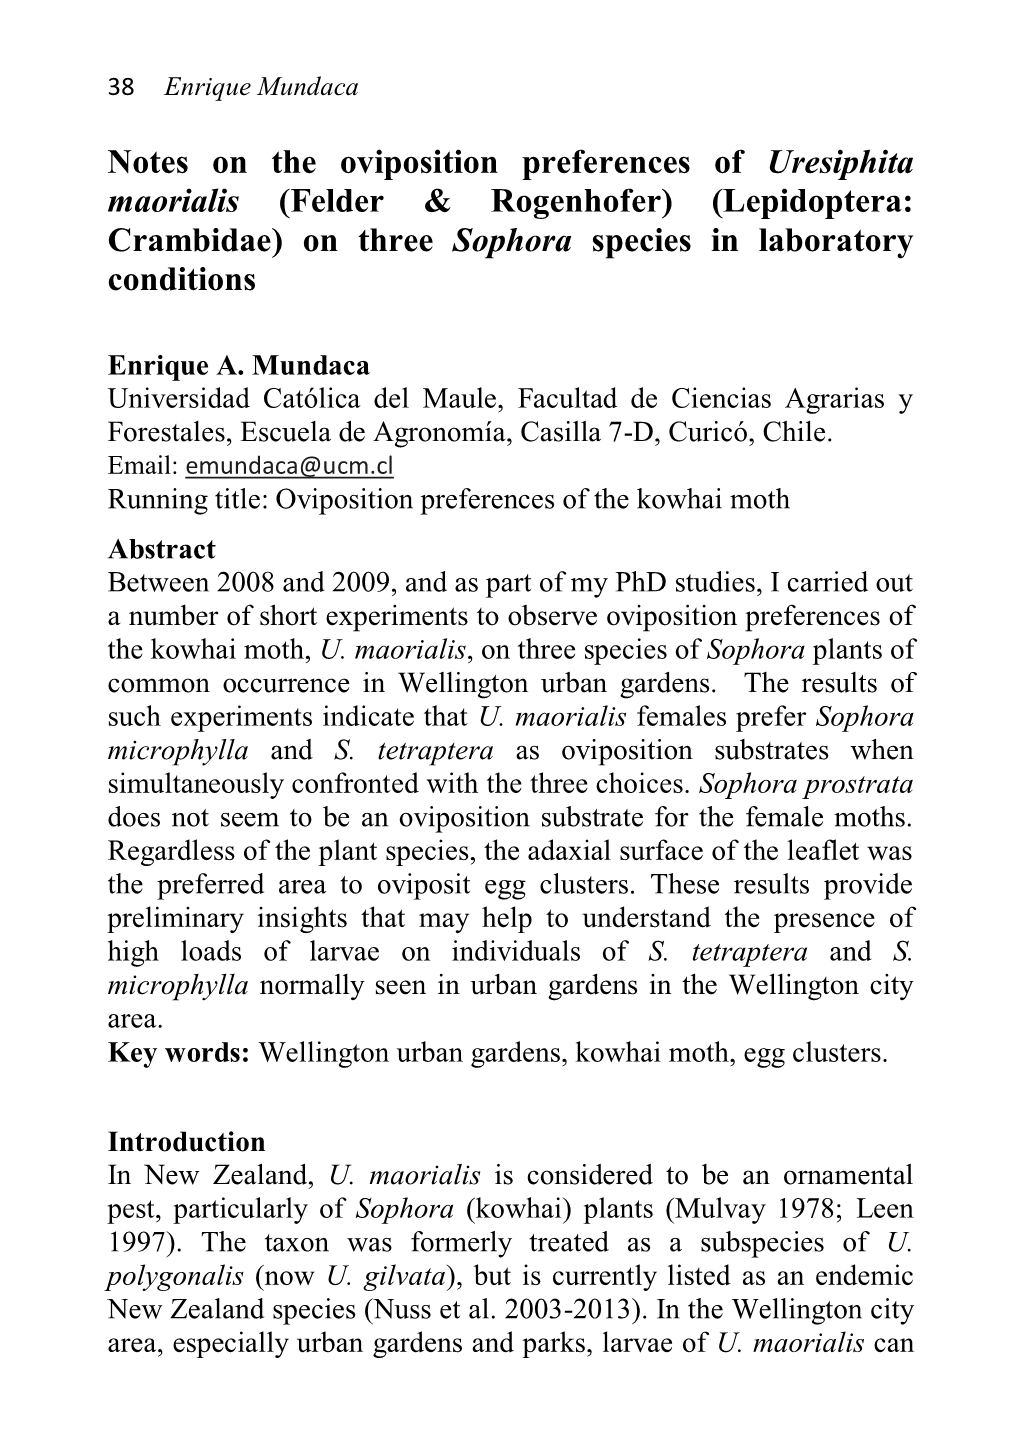 Notes on the Oviposition Preferences of Uresiphita Maorialis (Felder & Rogenhofer) (Lepidoptera: Crambidae) on Three Sophora Species in Laboratory Conditions